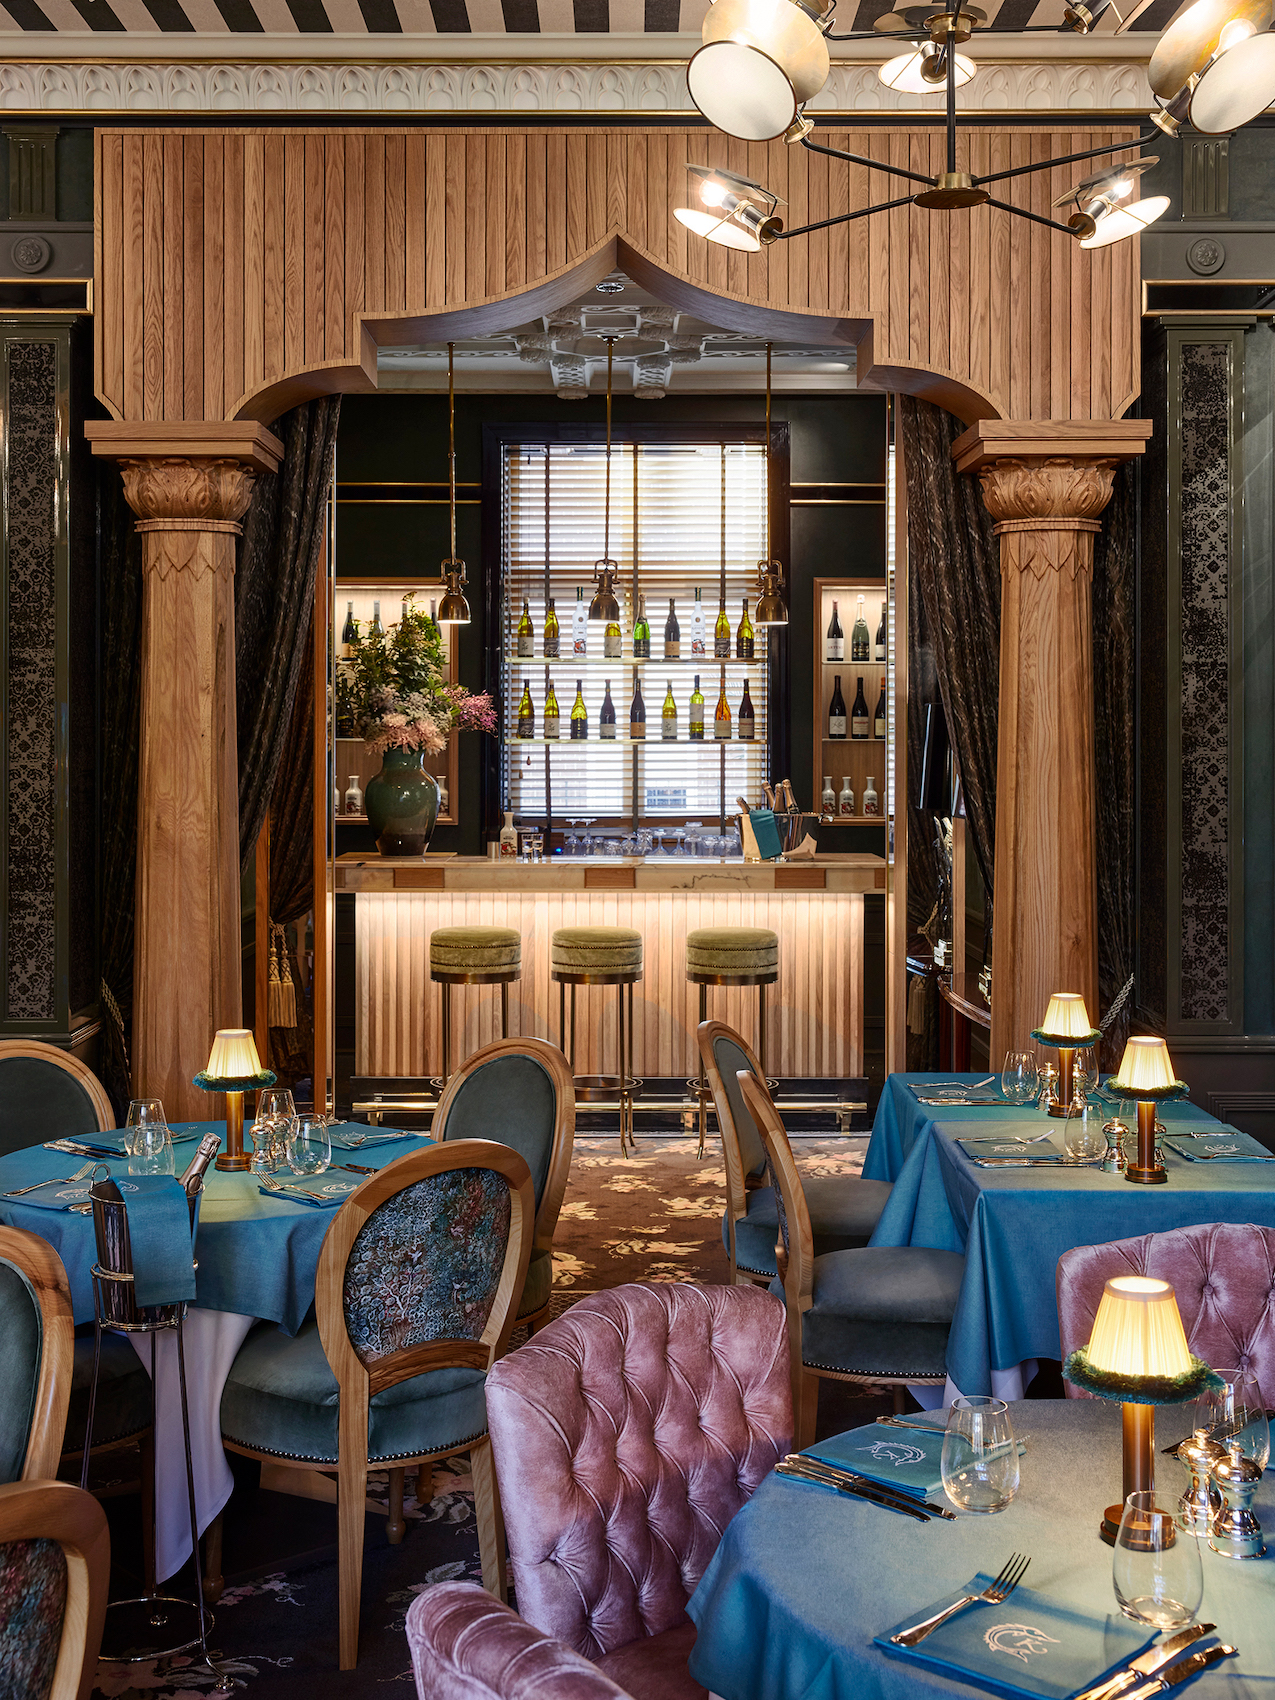 Arabesques, textures, ornate ceilings and art at Caviar Kaspia London in Effect Magazine